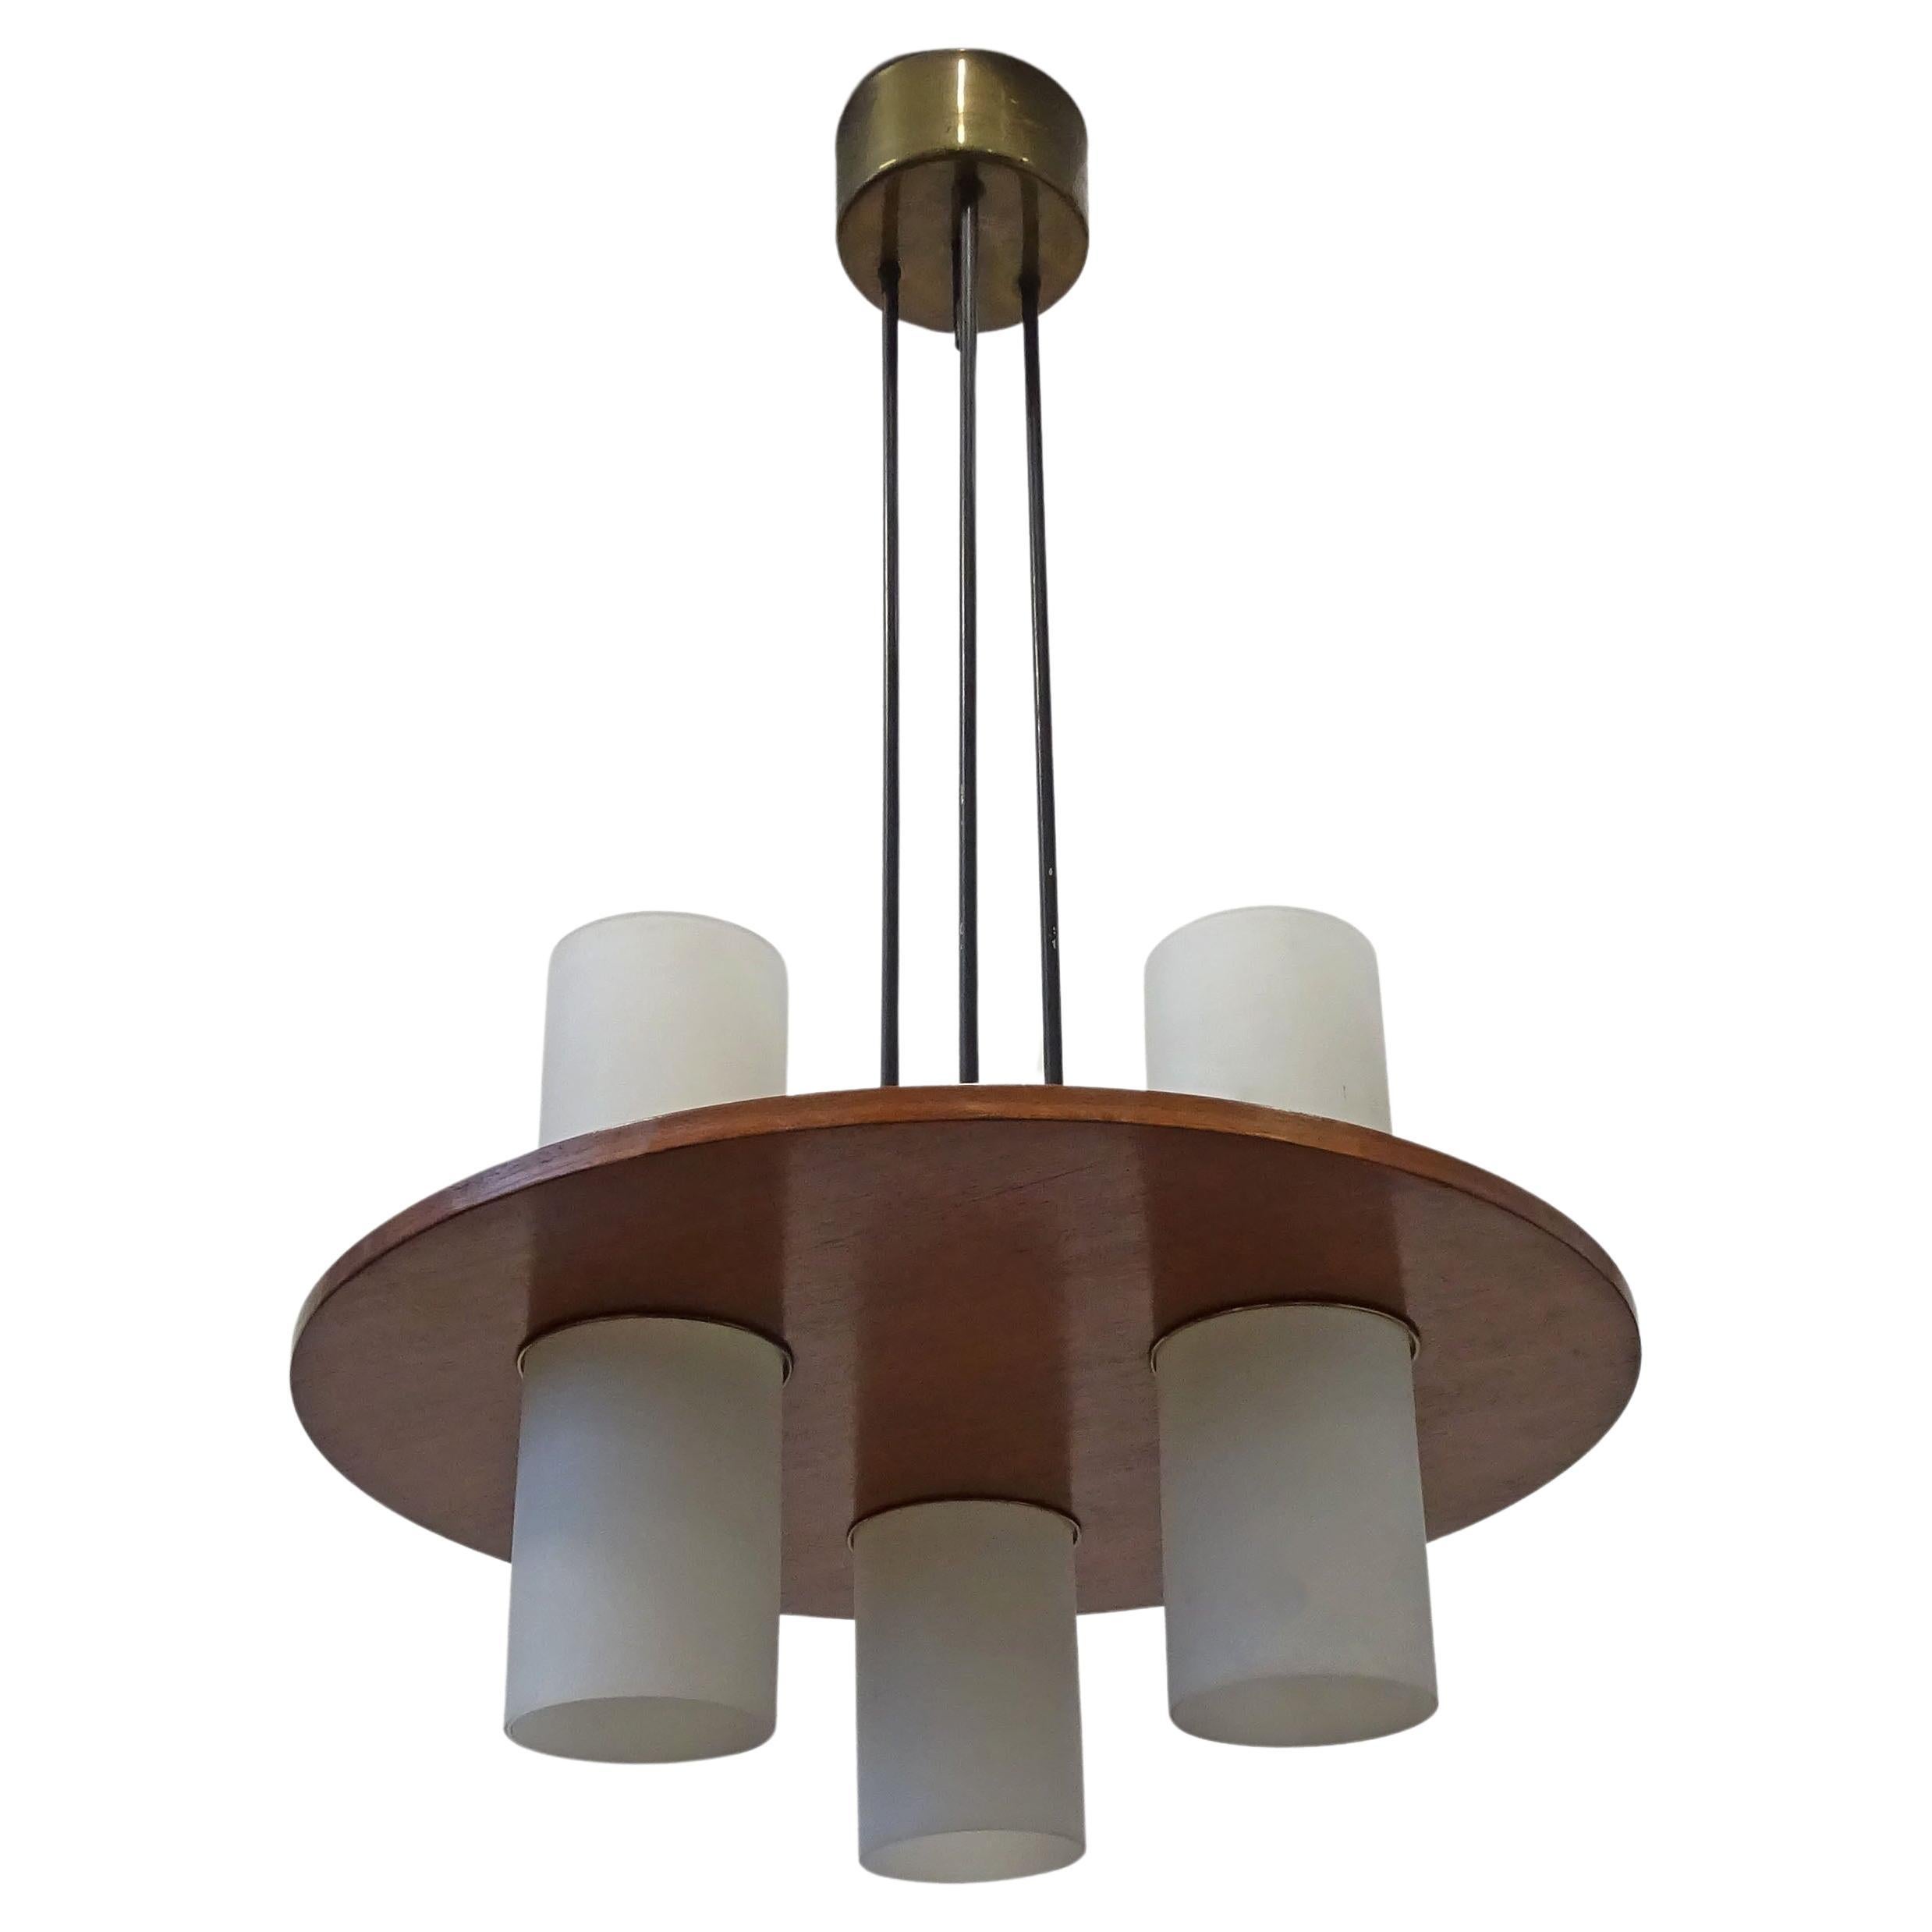 Elegant Italian 1950s Teak and Opaline Glass Cylinders Ceiling Lamp For Sale